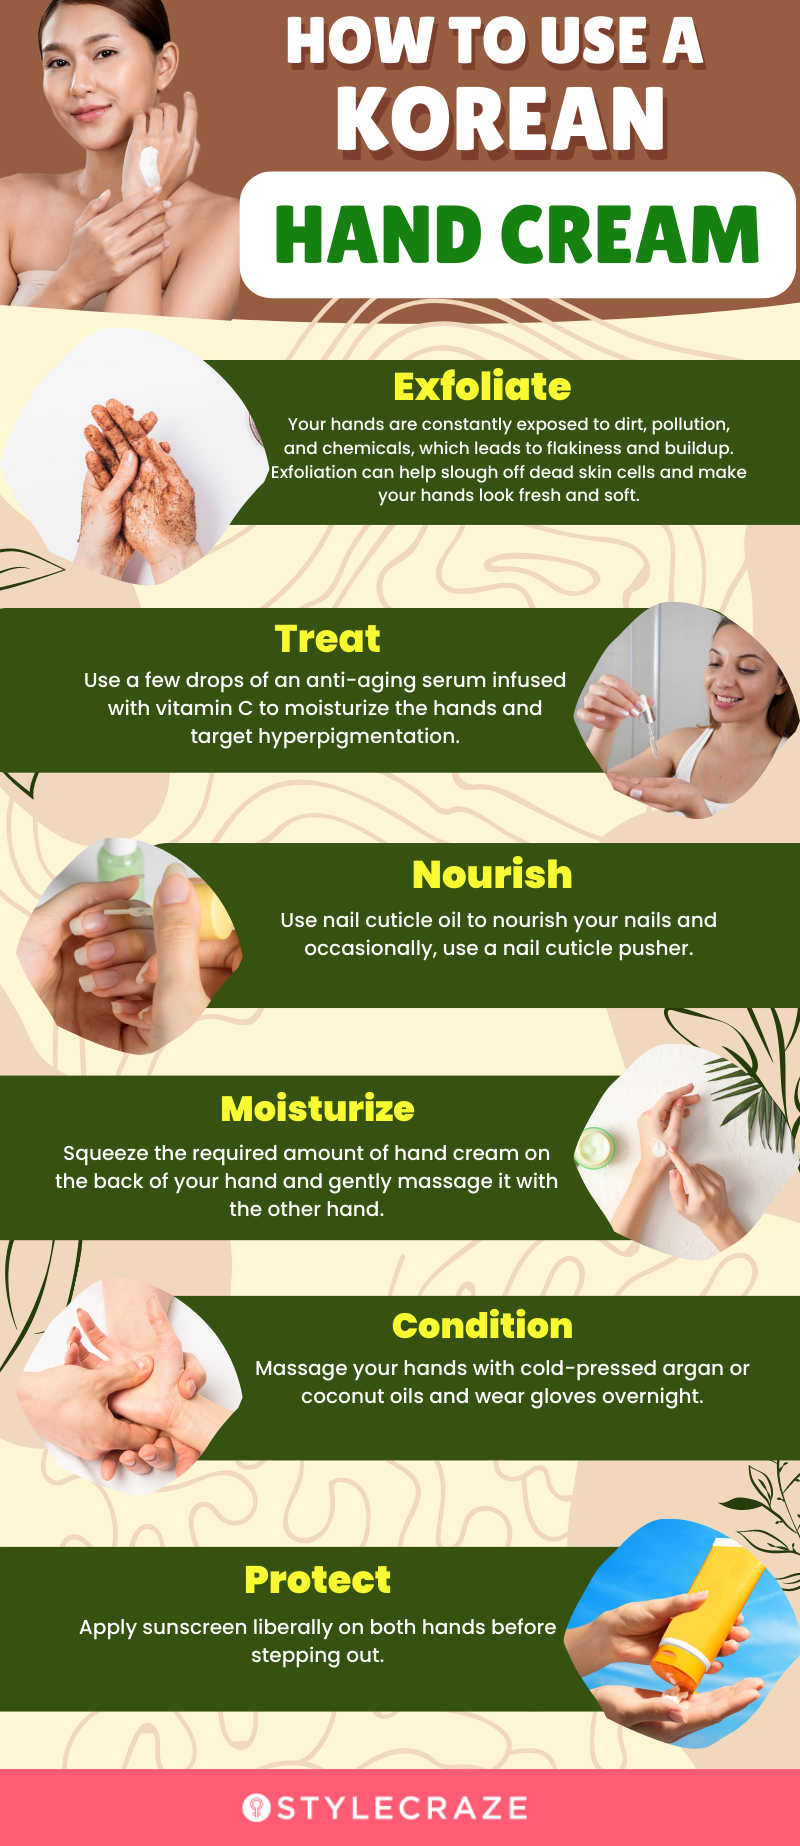 How To Use Korean Hand Cream Step by Step (infographic)